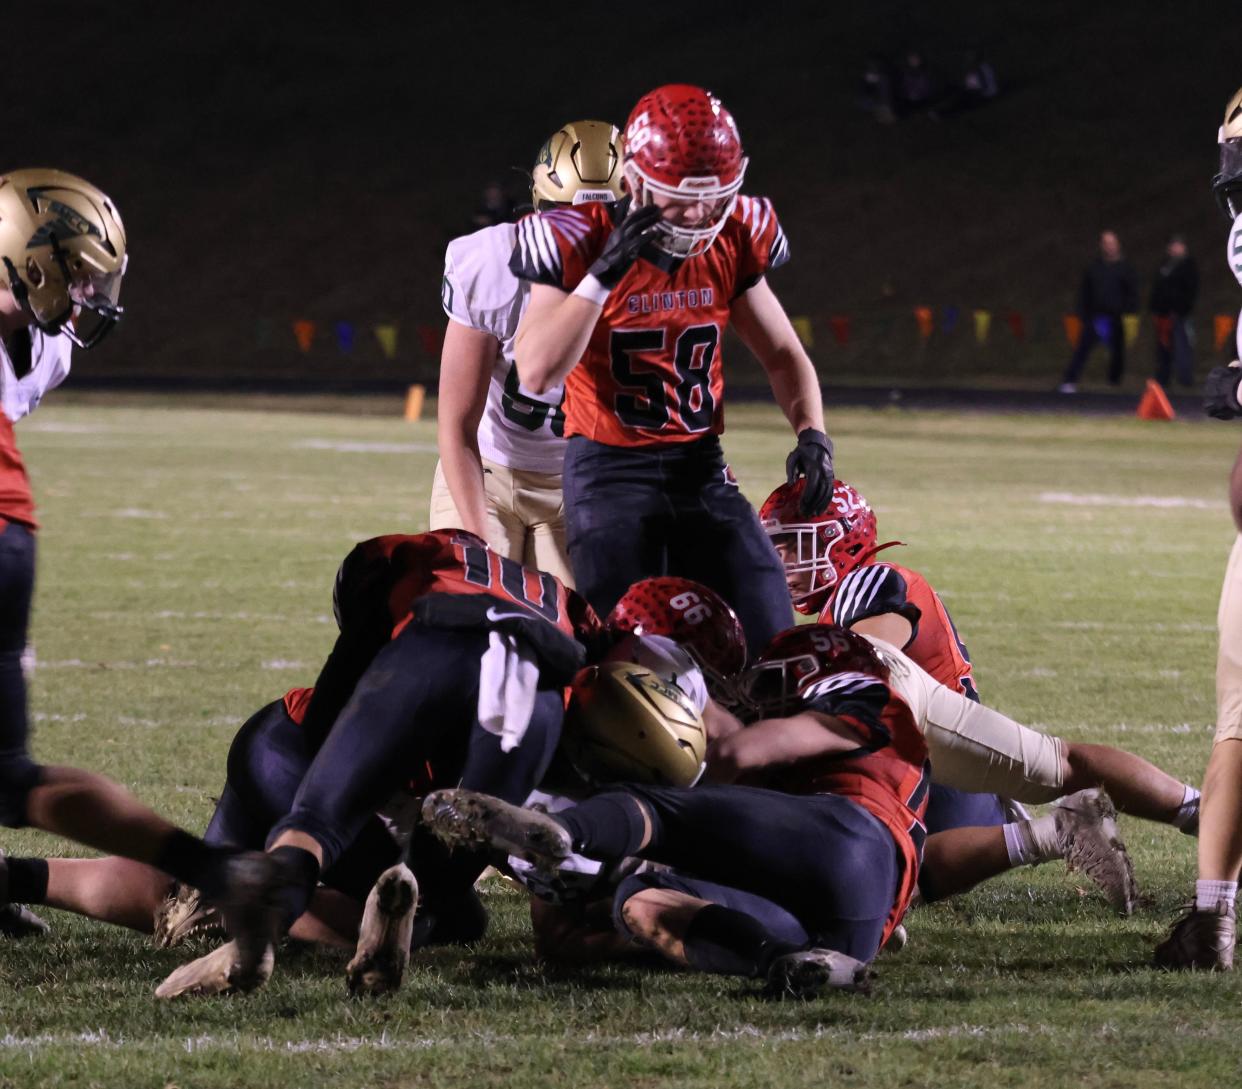 Clinton's Teddy Pizio stands above the pile after the Redwolves defense makes a stop against Monroe St. Mary Catholic Central in the Division 7 district championship game.